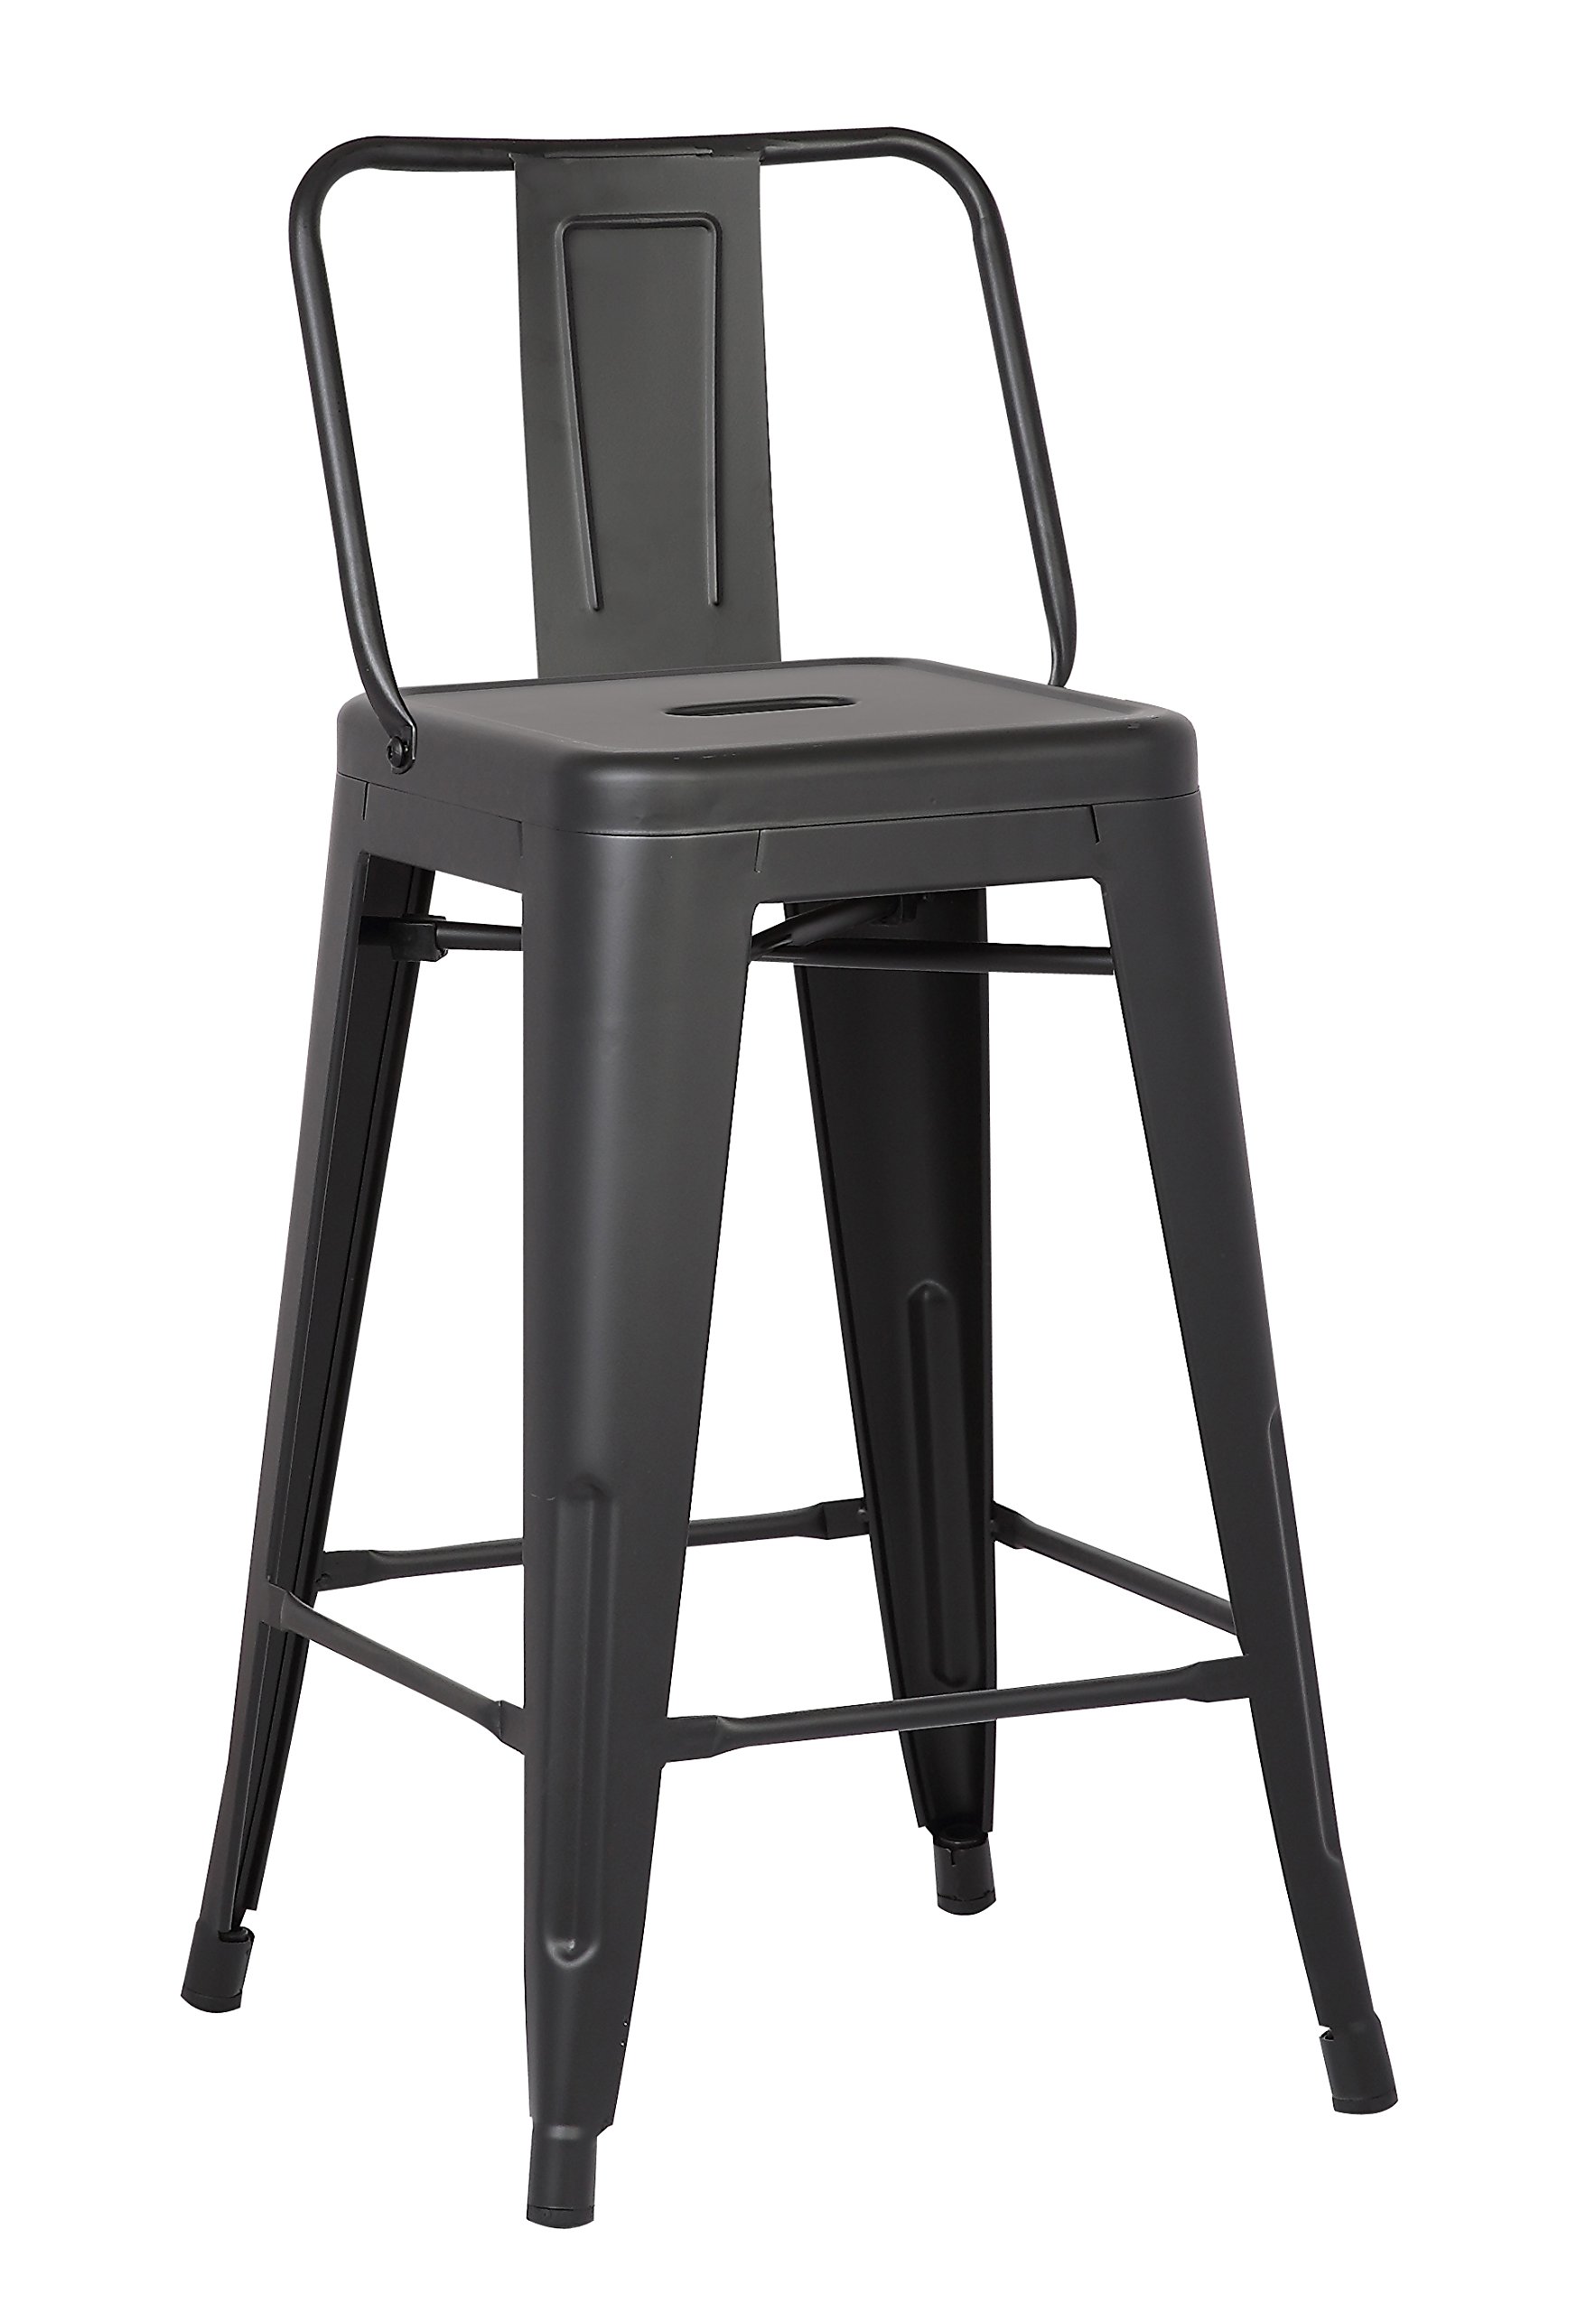 AC Pacific Modern Industrial Metal Bar Stool, Bucket Back and 4 Leg Design Ideal for Kitchen Island or Counter Top, Set of 2, 24